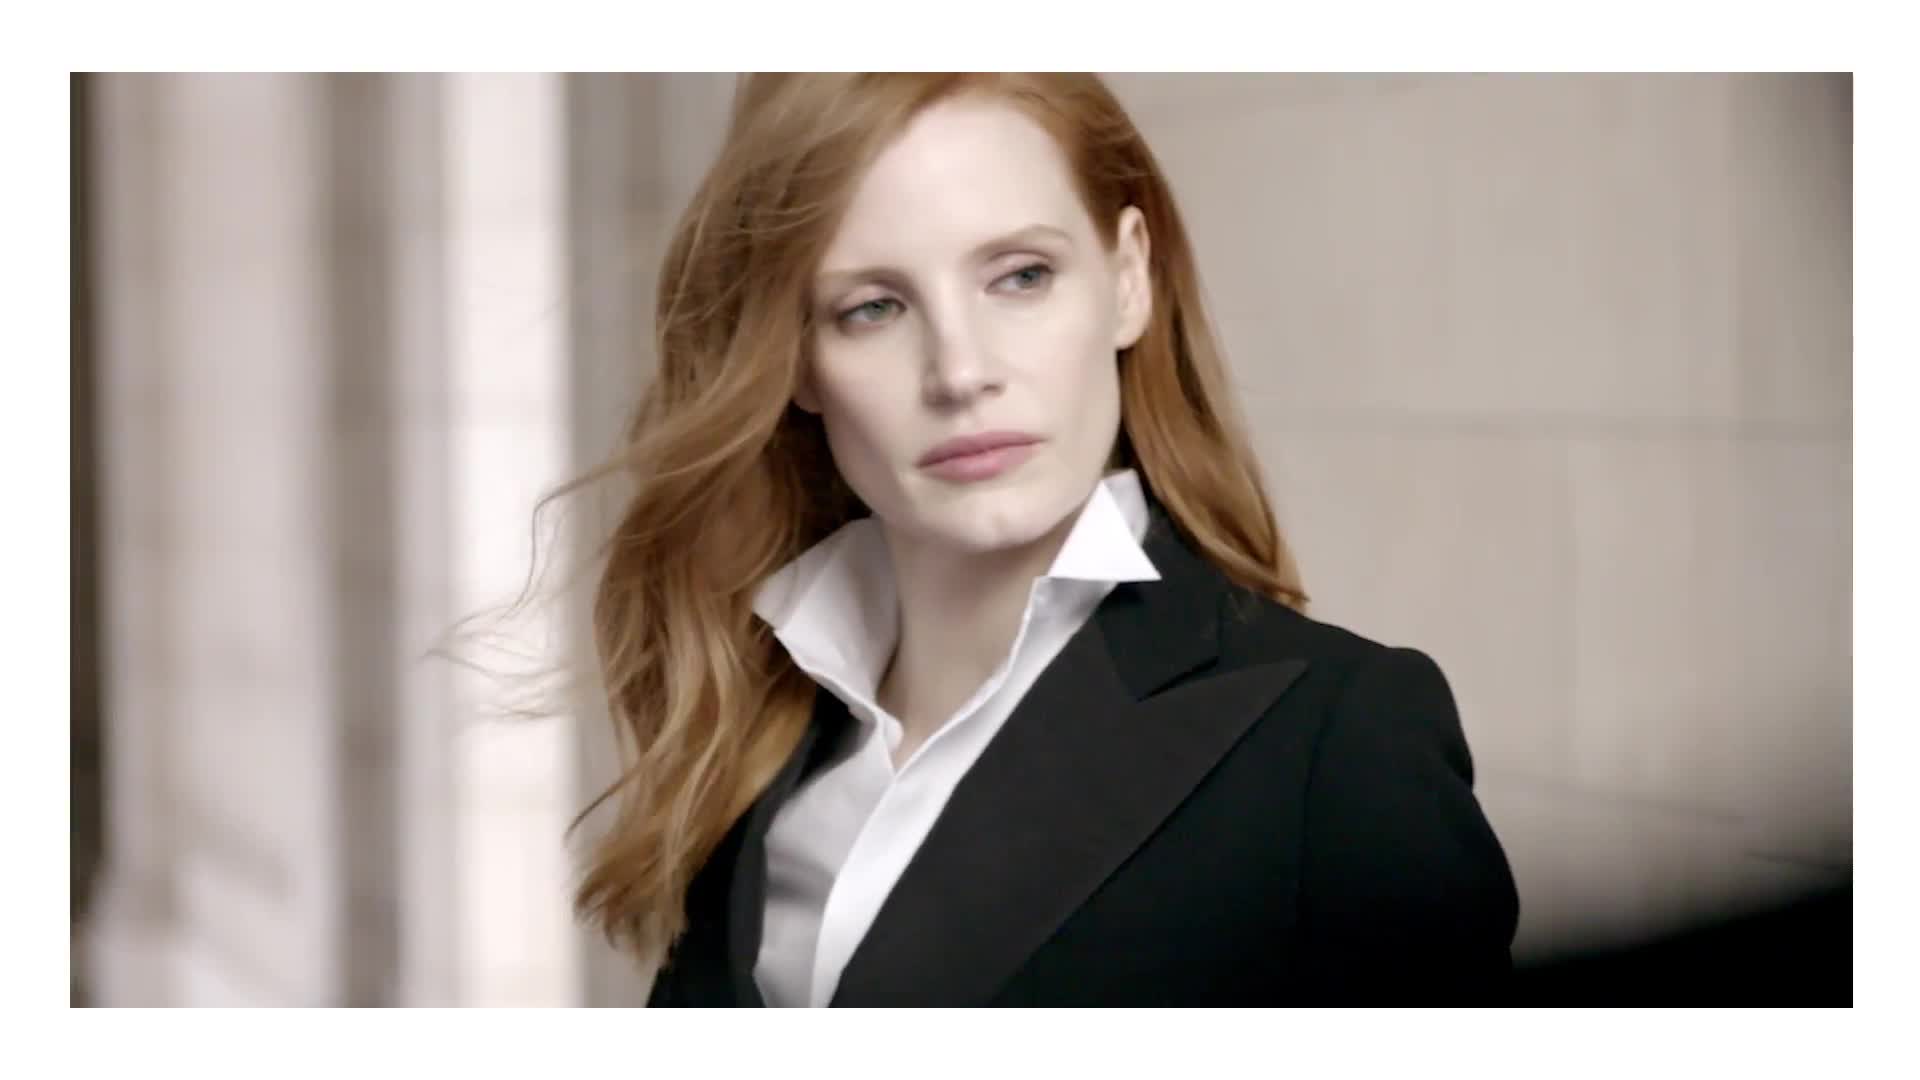 Jessica Chastain Is The Face of Ralph Lauren Fragrance 'Woman